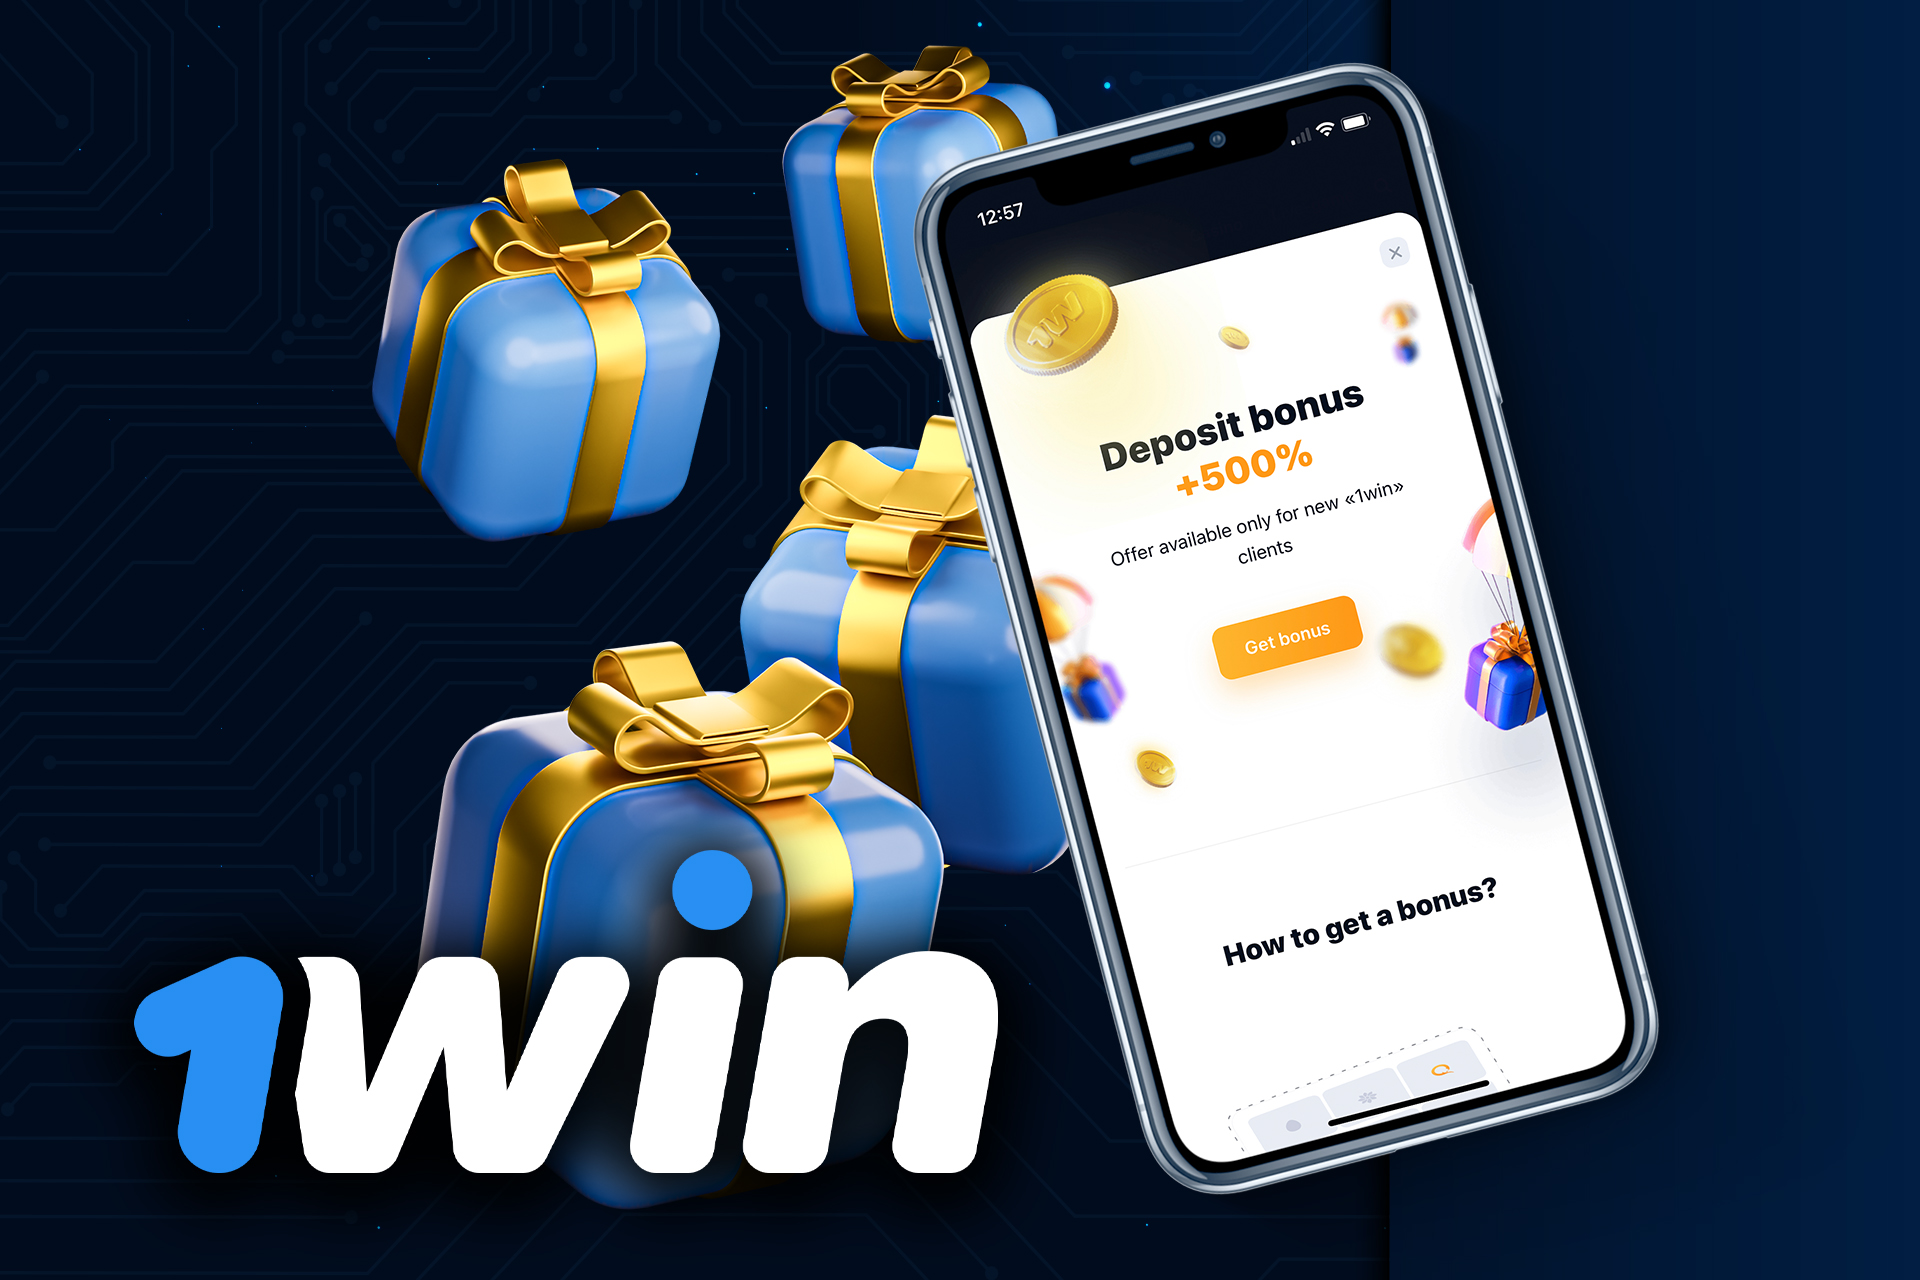 1win app welcome bonus gives +500% to your first deposit up to 100,000.